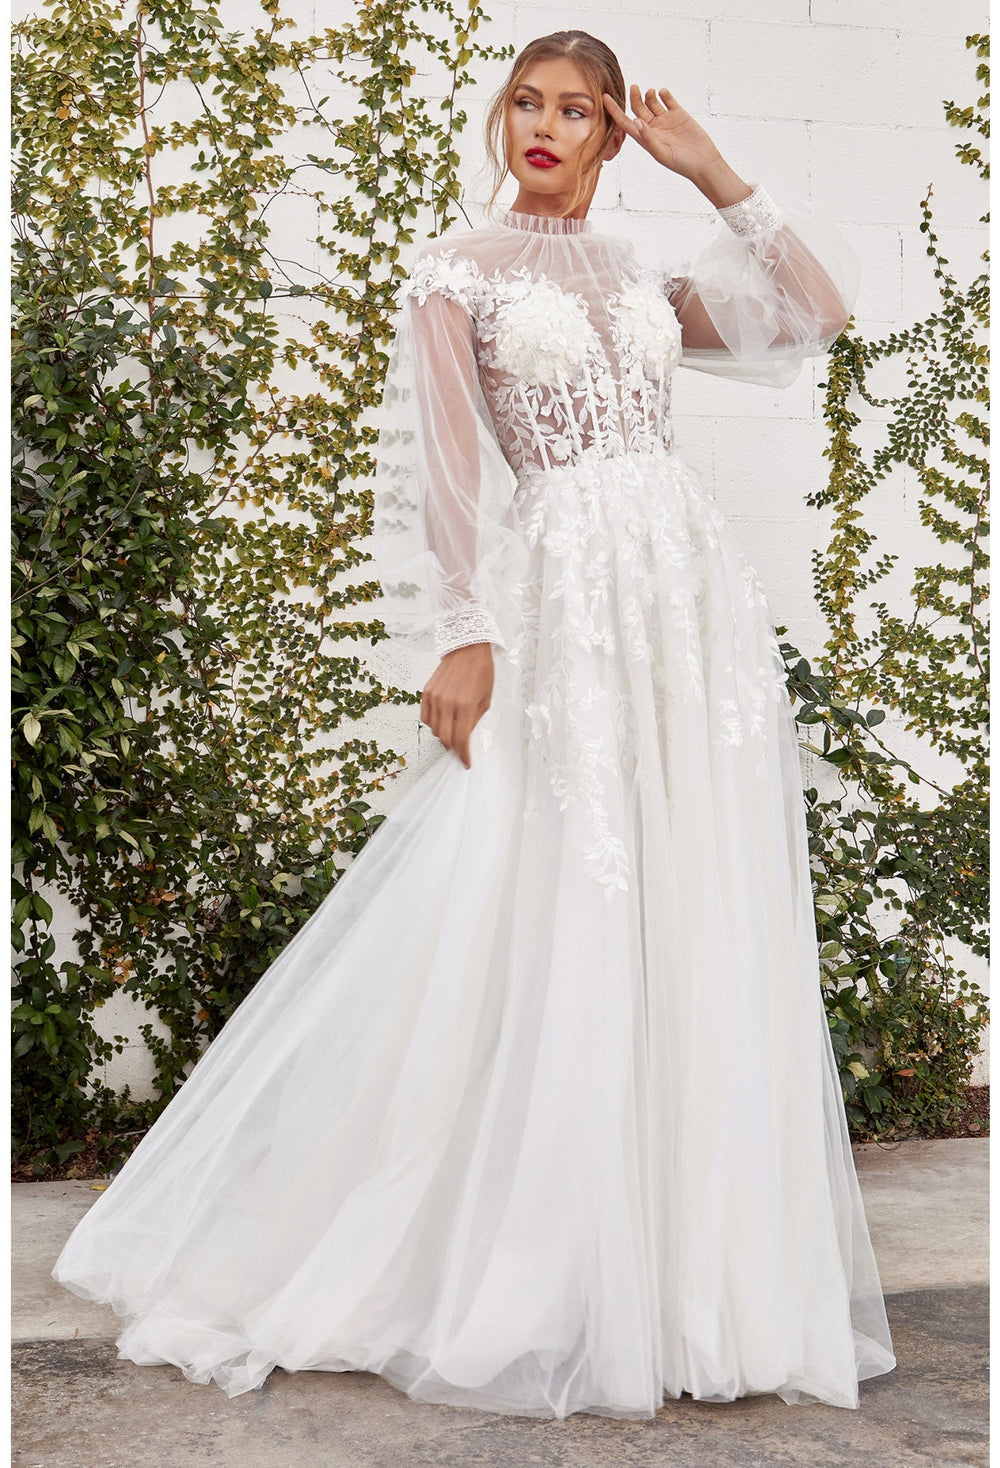 NoraCoutureNY Bridal Gown Lulu Bridal Princess Gown